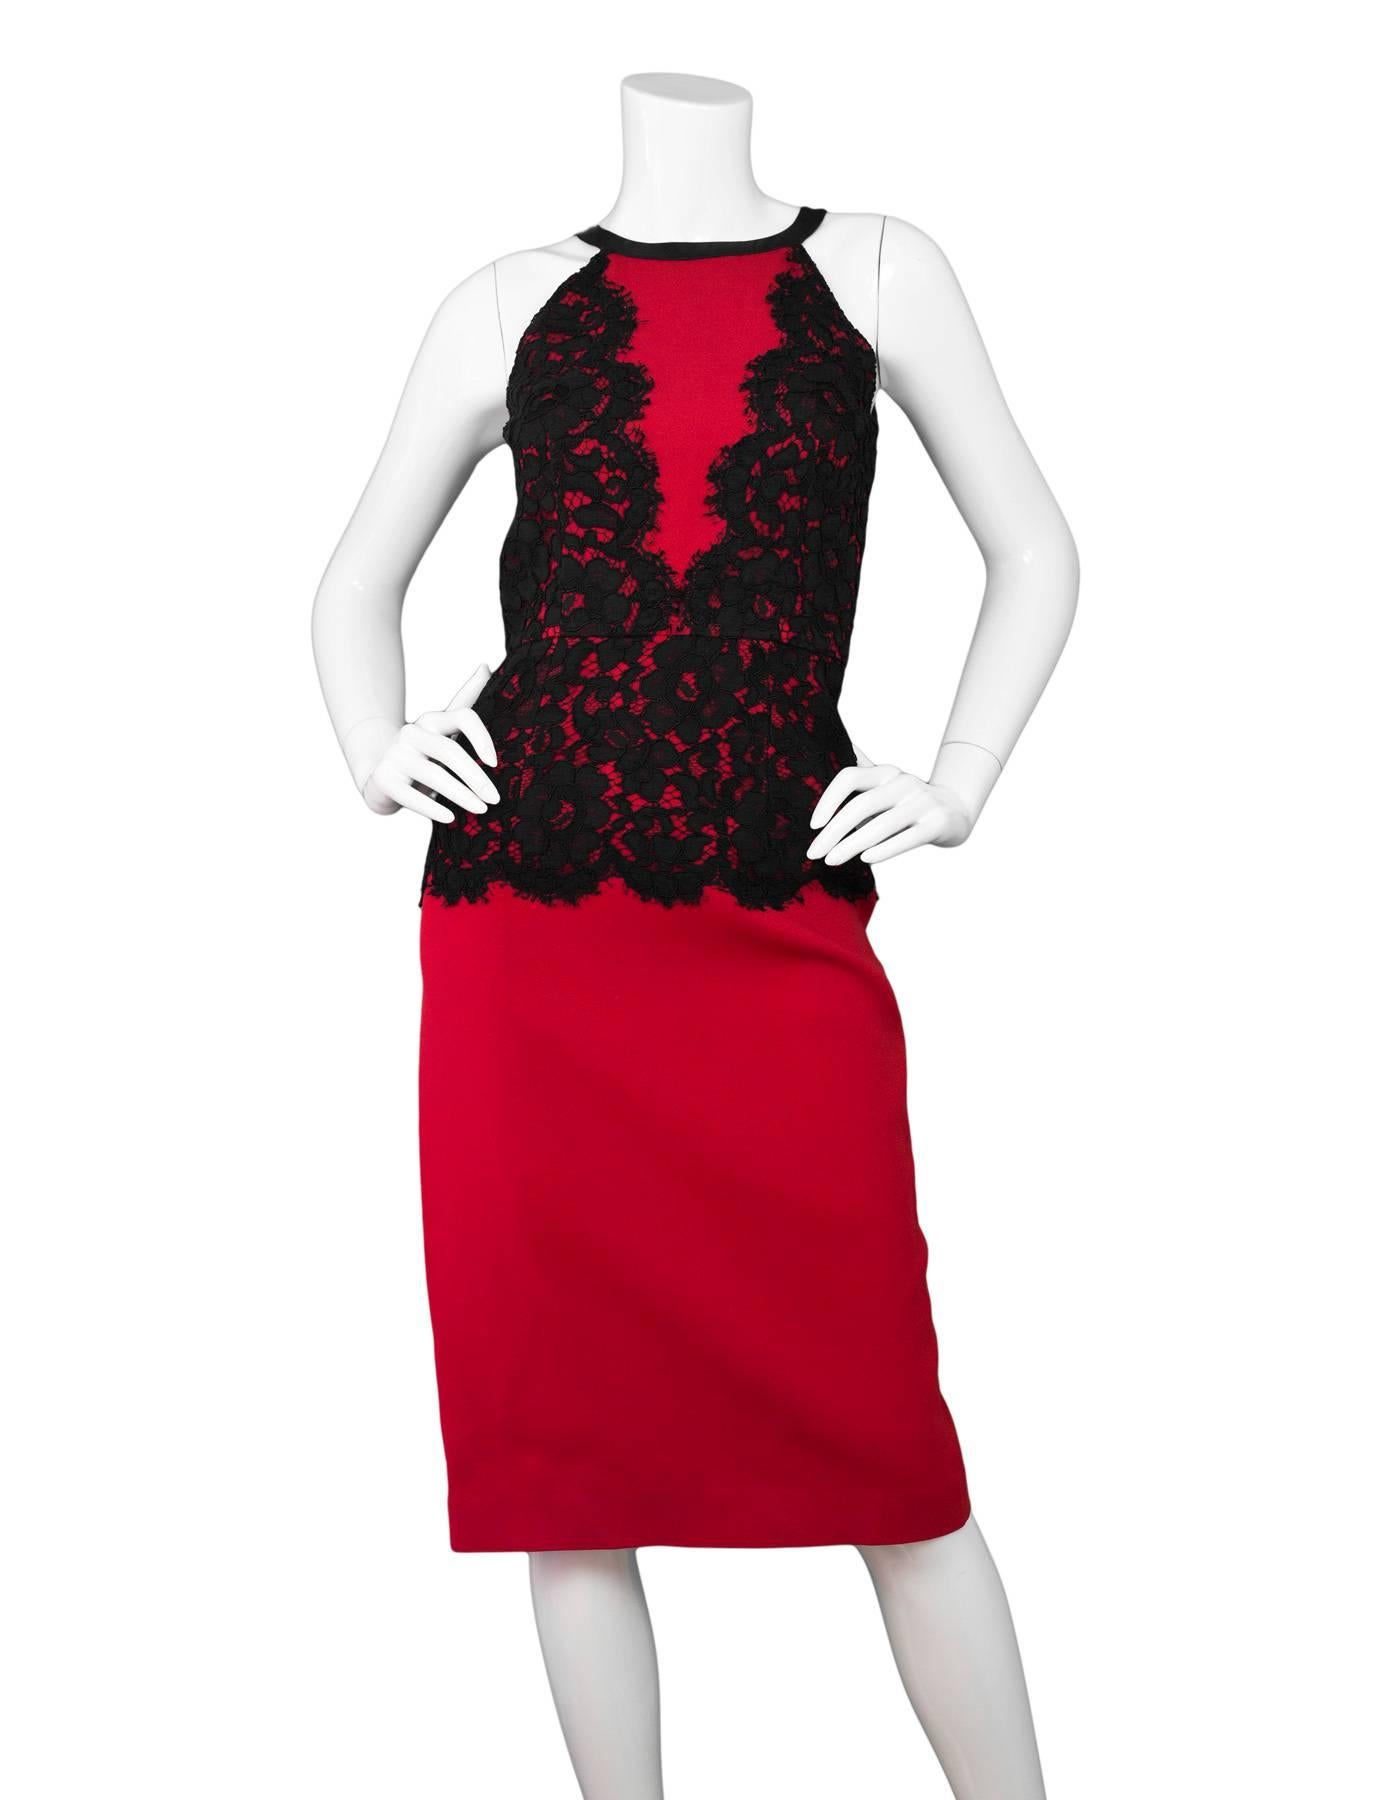 Michael Kors Collection Red & Black Lace Cocktail Dress
Features black satin trim at neckline and black lace overlay through bodice

Made In: Italy
Color: Red and black
Composition: 53% acetate, 47% rayon
Lining: Red, 61% acetate, 39%